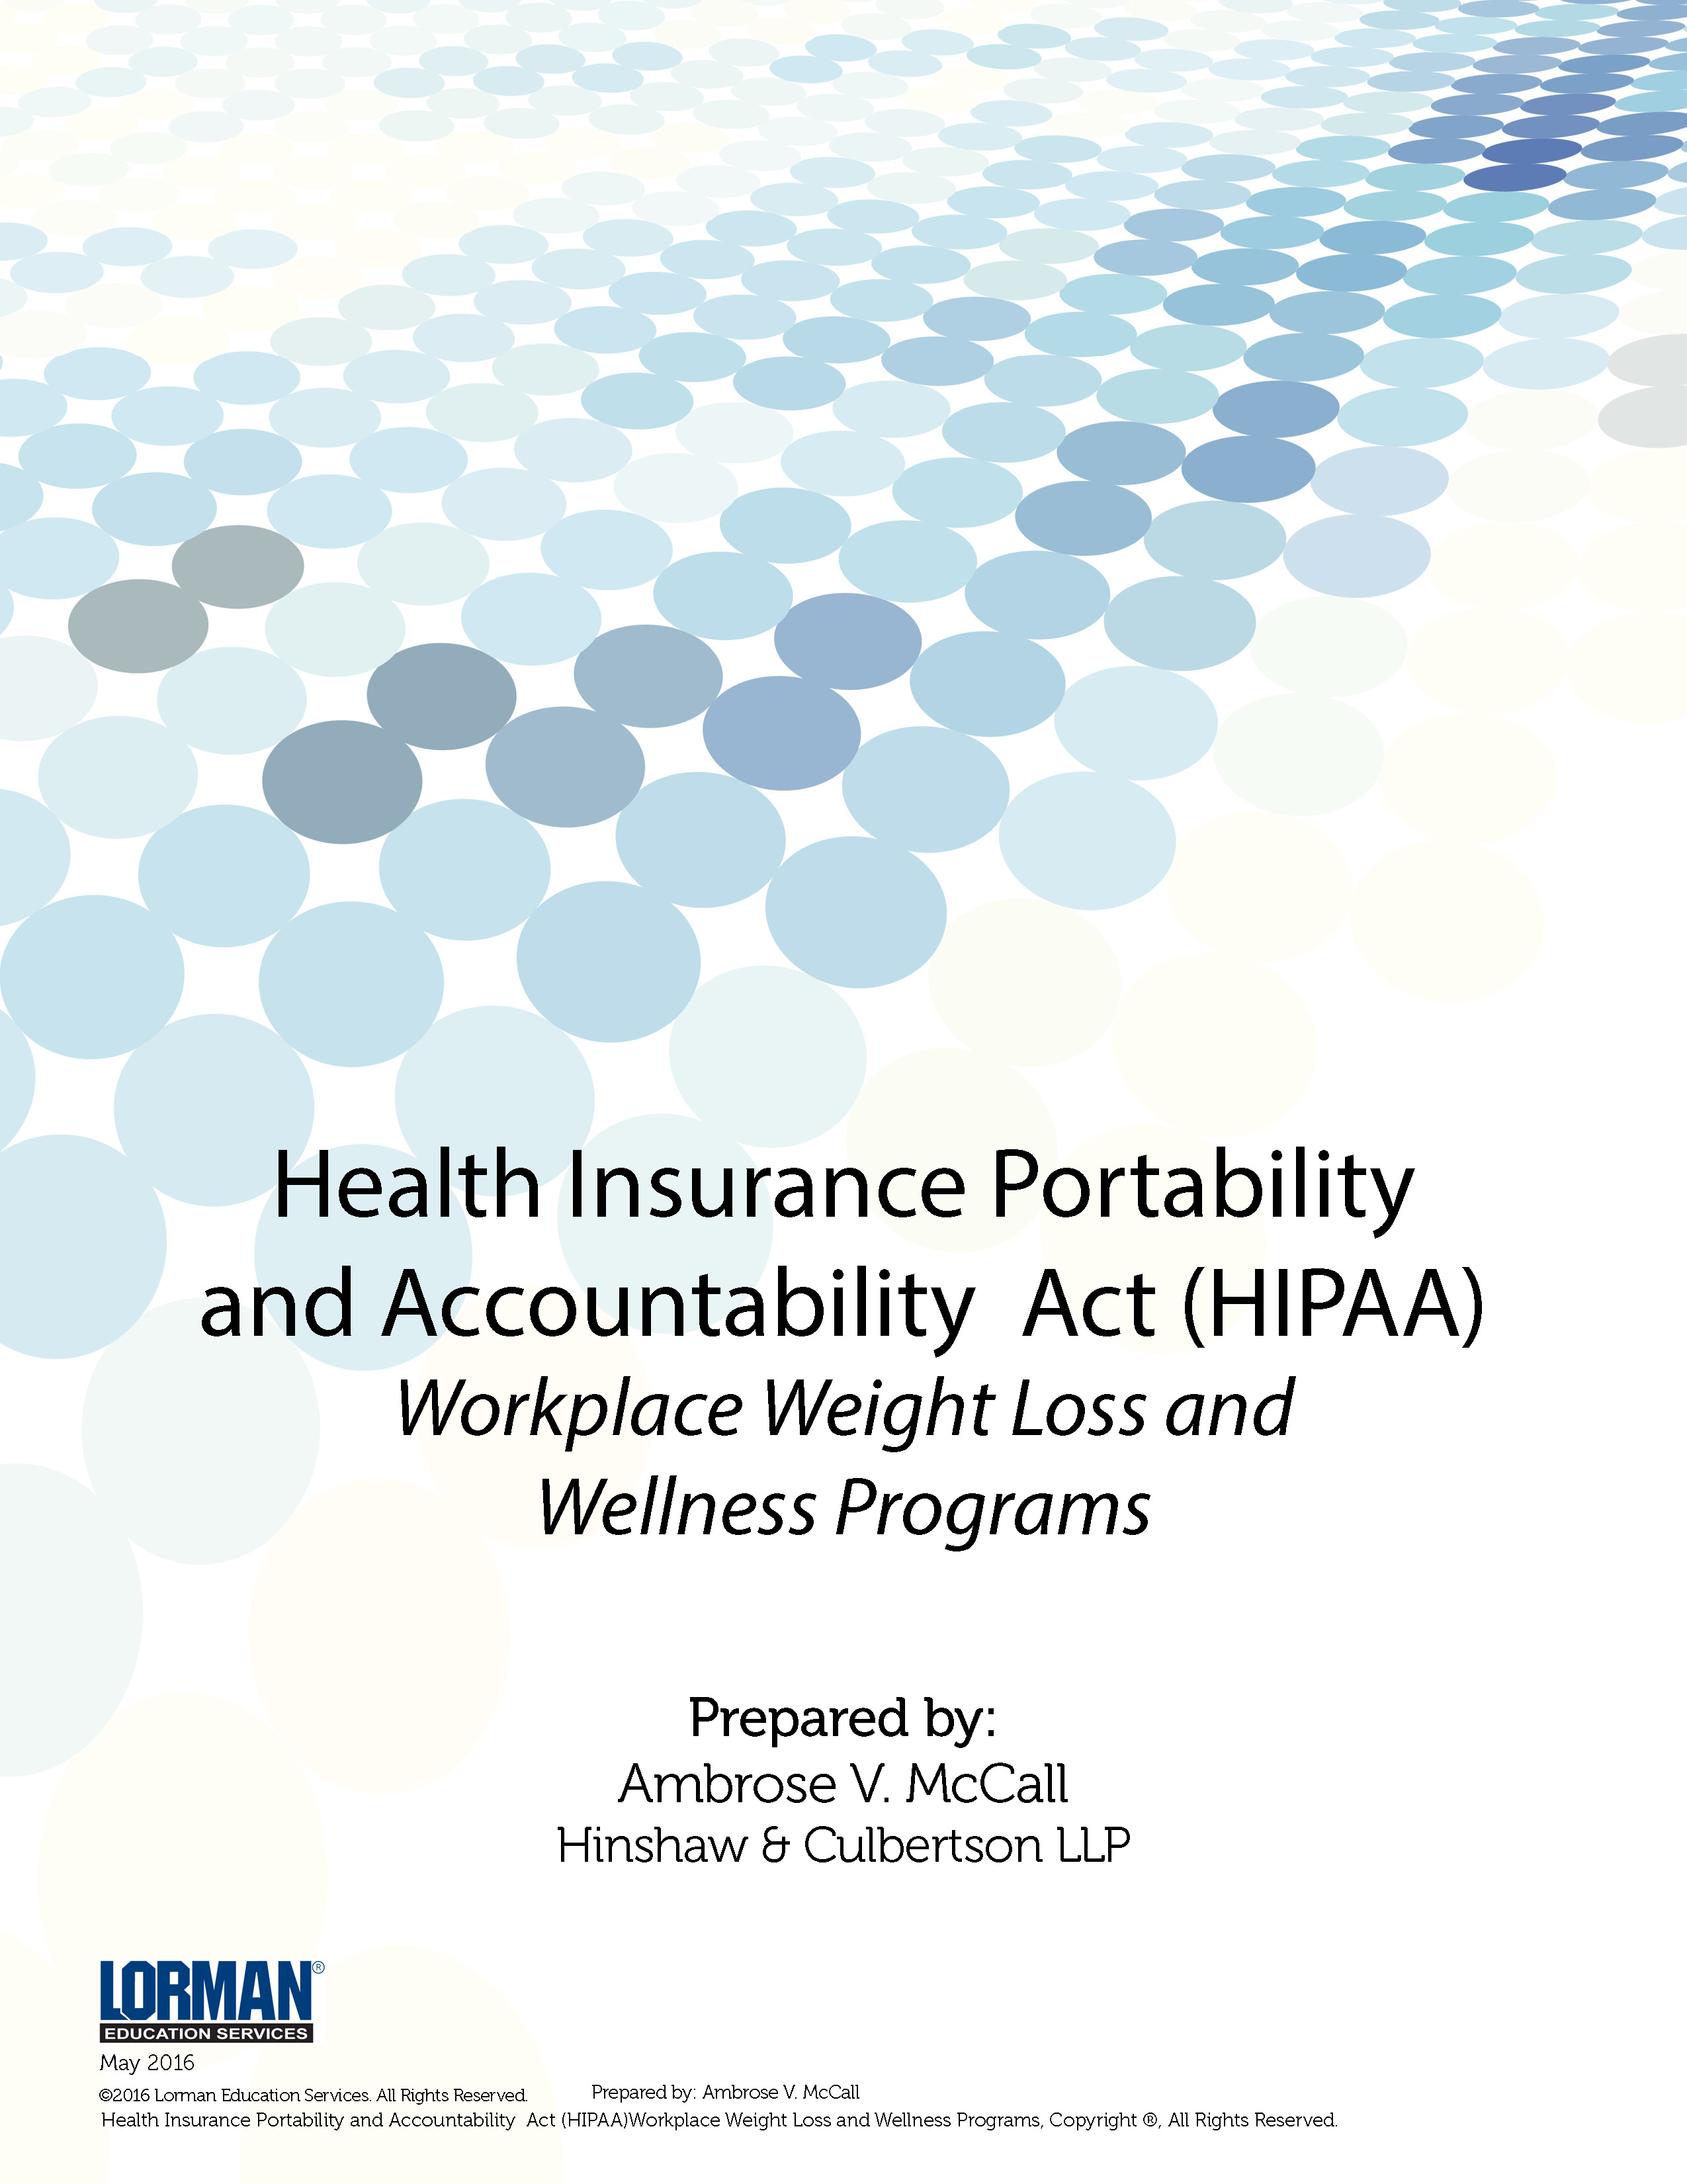 HIPAA - Workplace Weight Loss and Wellness Programs